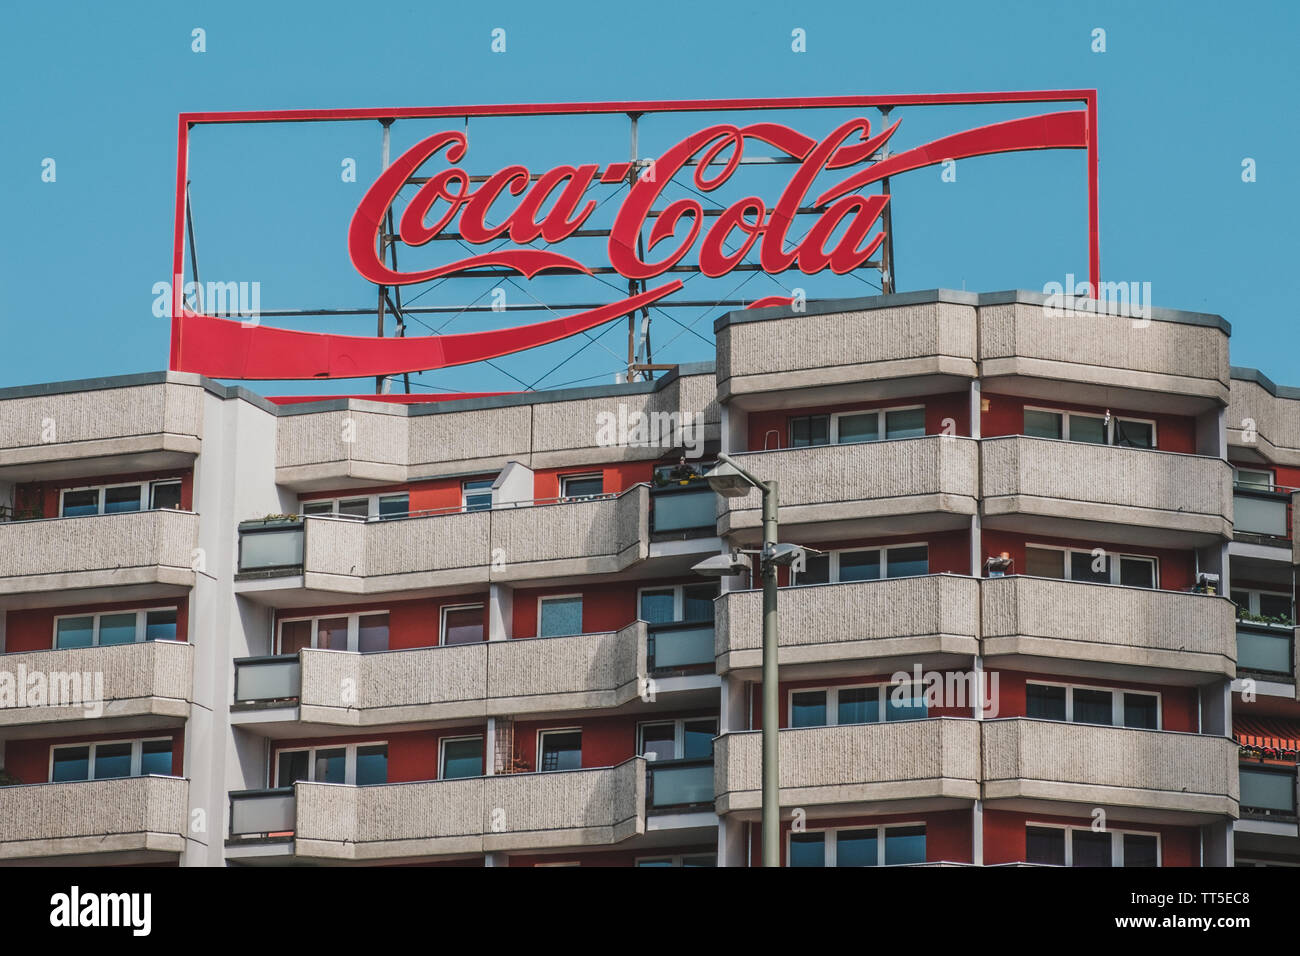 Berlin, Germany - june 2019: The Coca Cola logo advertising neon light letters on building roof in Berlin, Germany Stock Photo